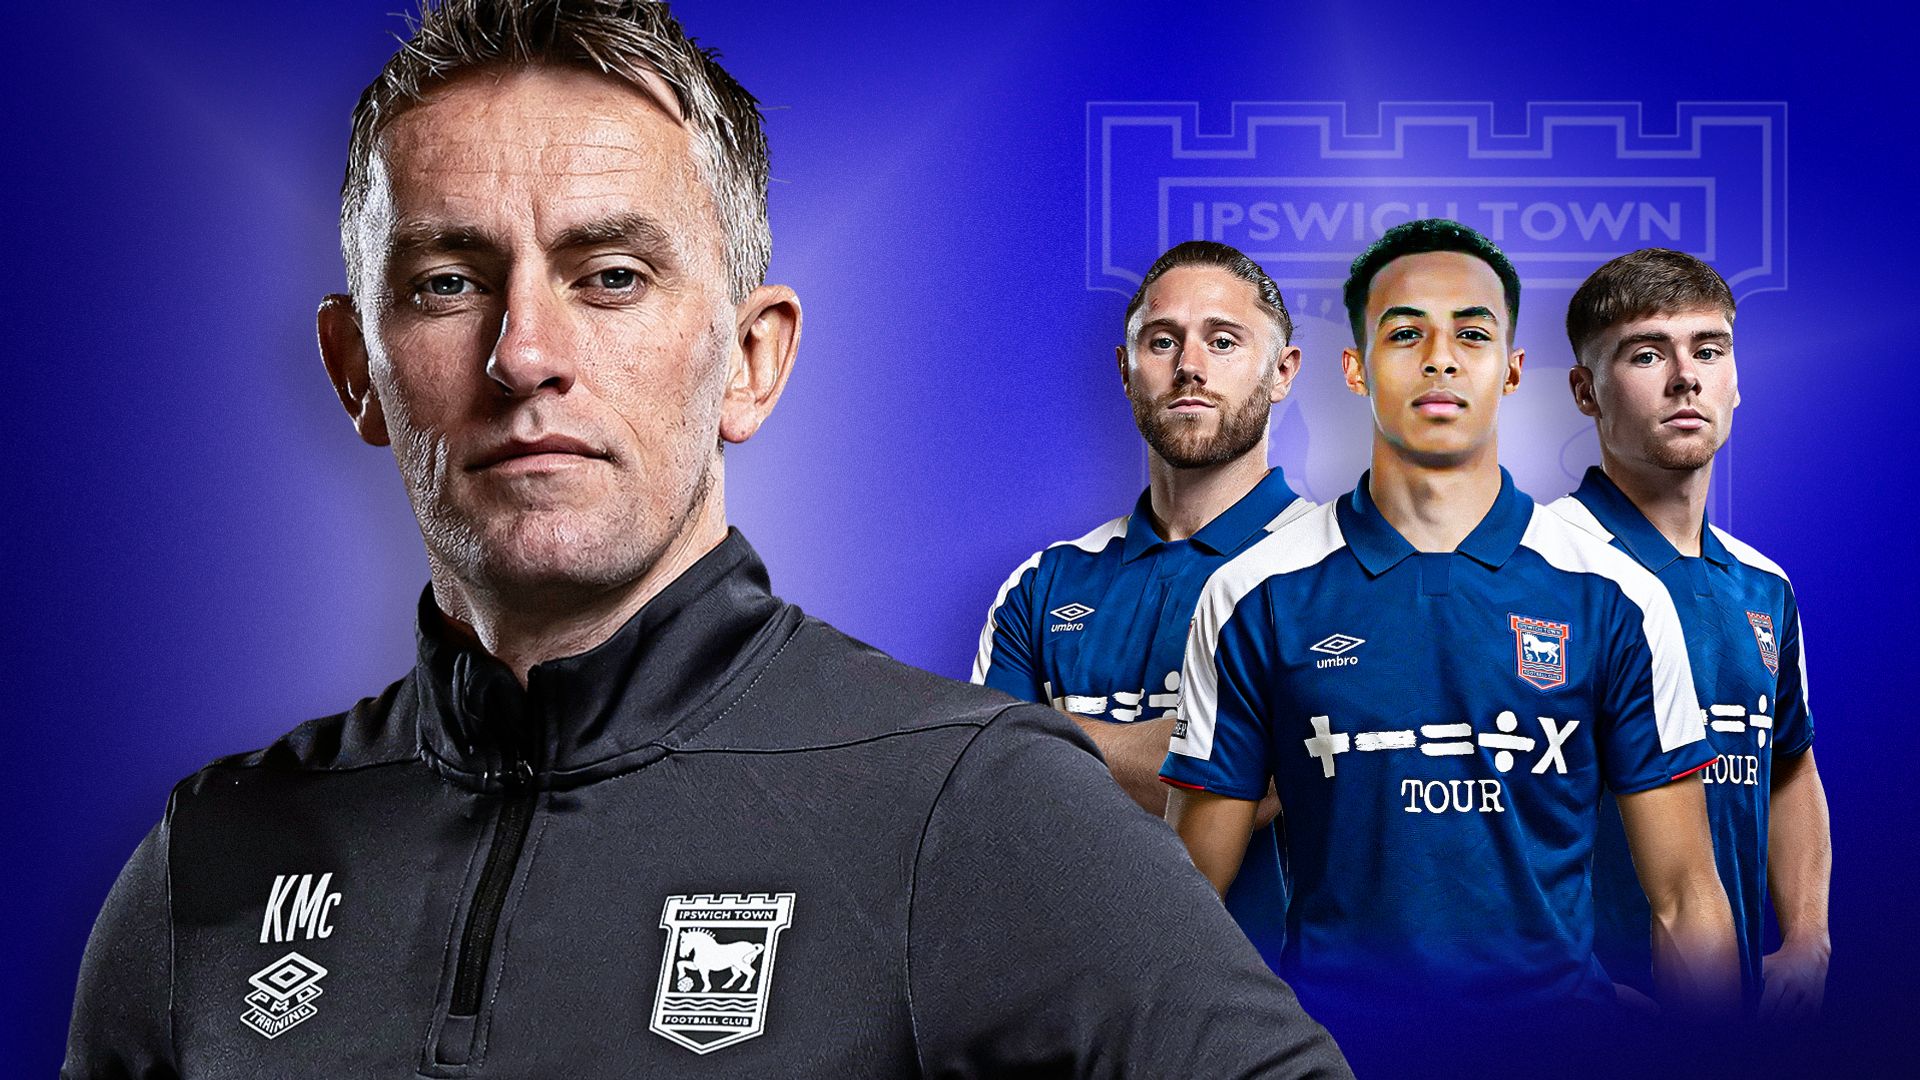 Ipswich's 'incredible' McKenna – in the words of his players